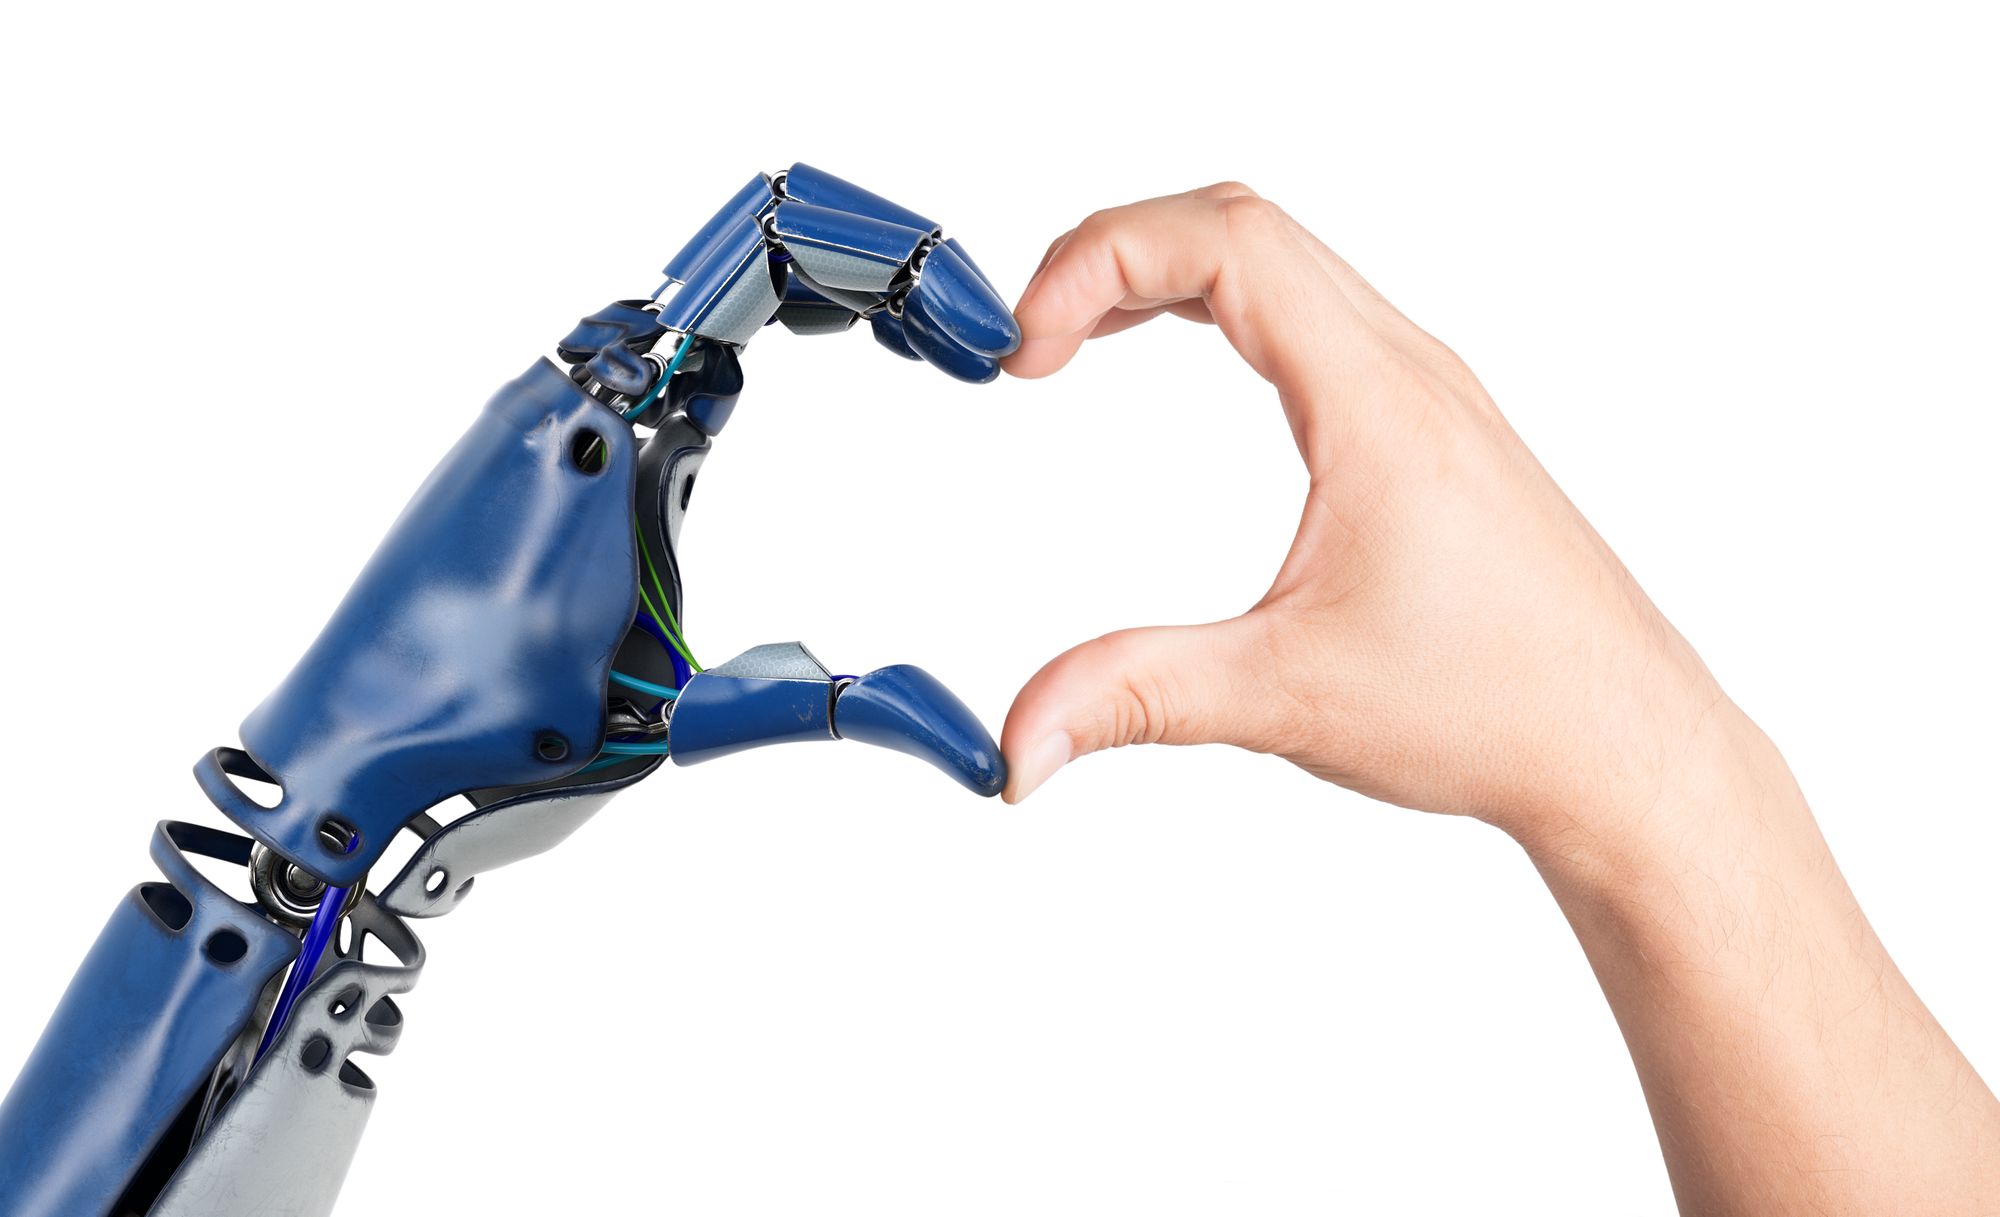 Robot hand and human hand forming a heart